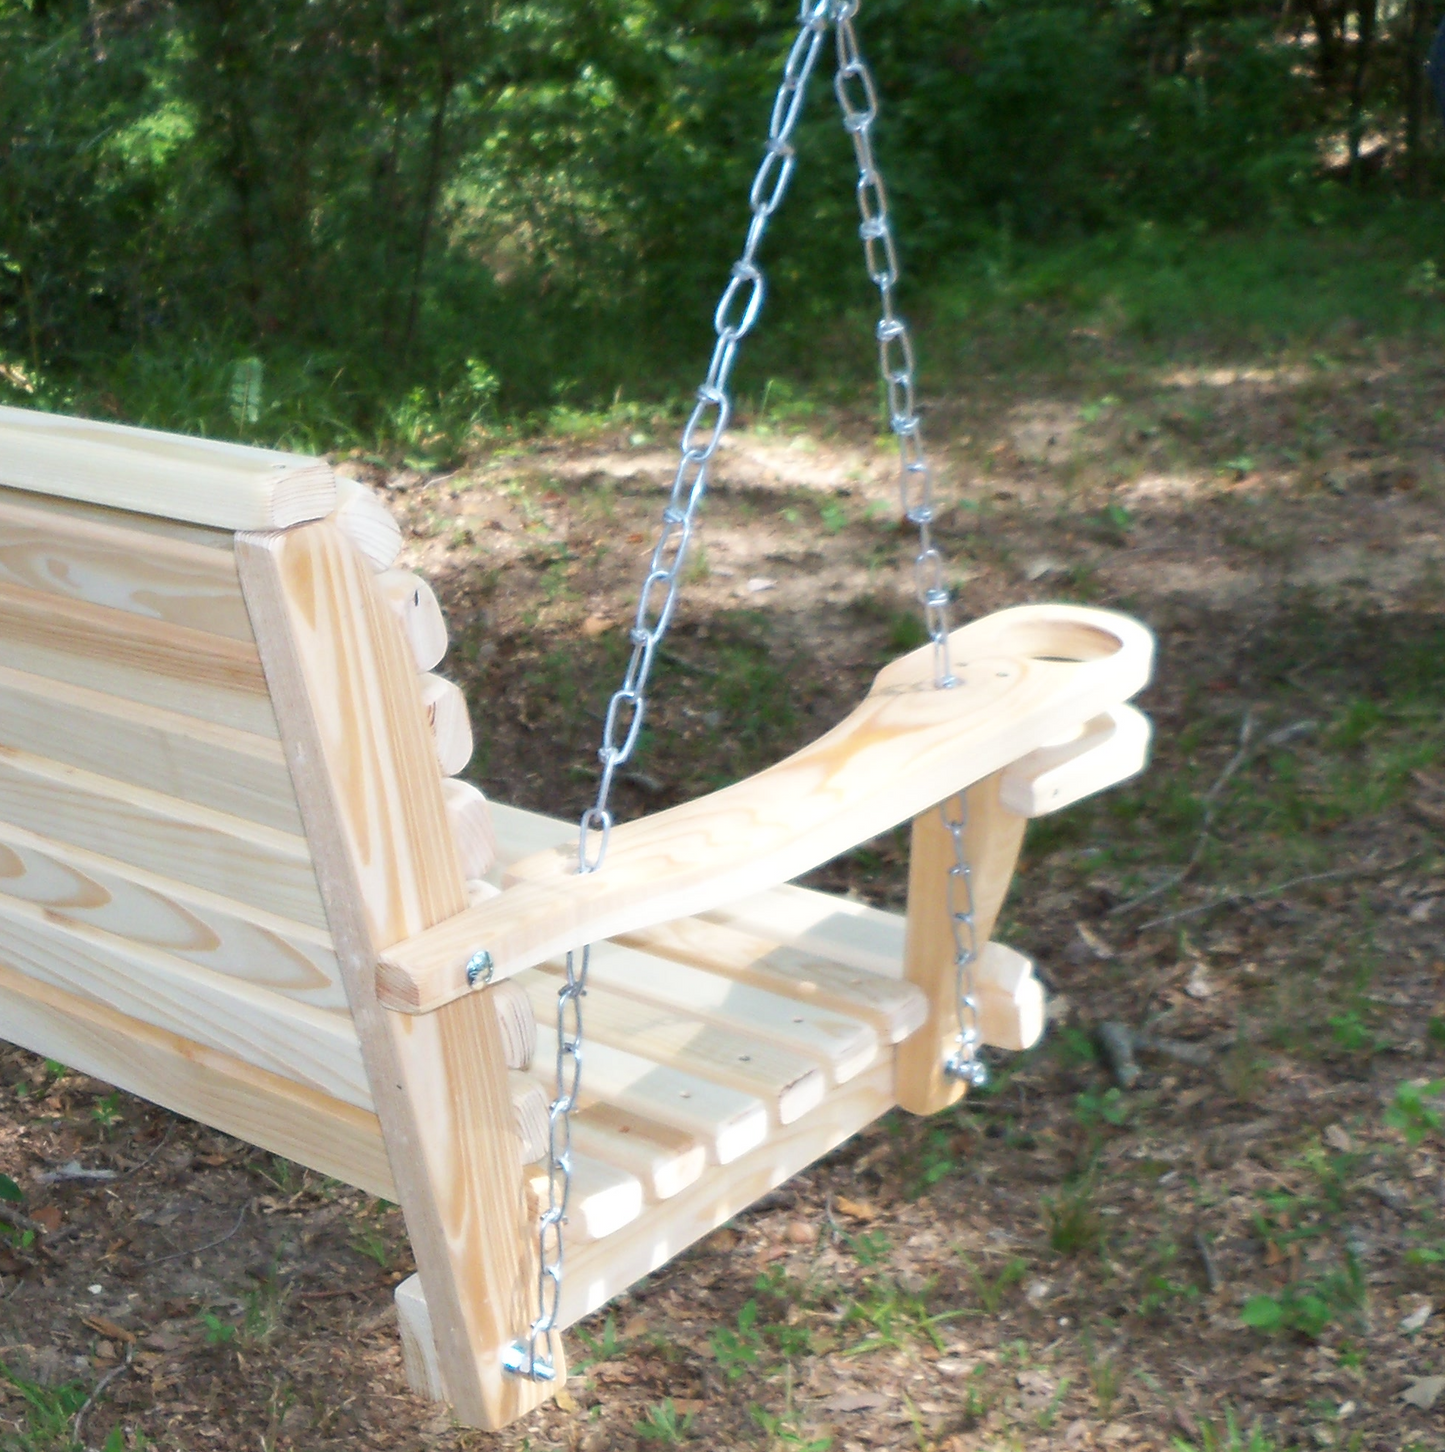 LA Swings Inc. 6ft. Cypress Regular Porch Swing - LEAD TIME TO SHIP  (UNFINISHED 7 BUSINESS DAYS) - (FINISHED 15 BUSINESS DAYS)